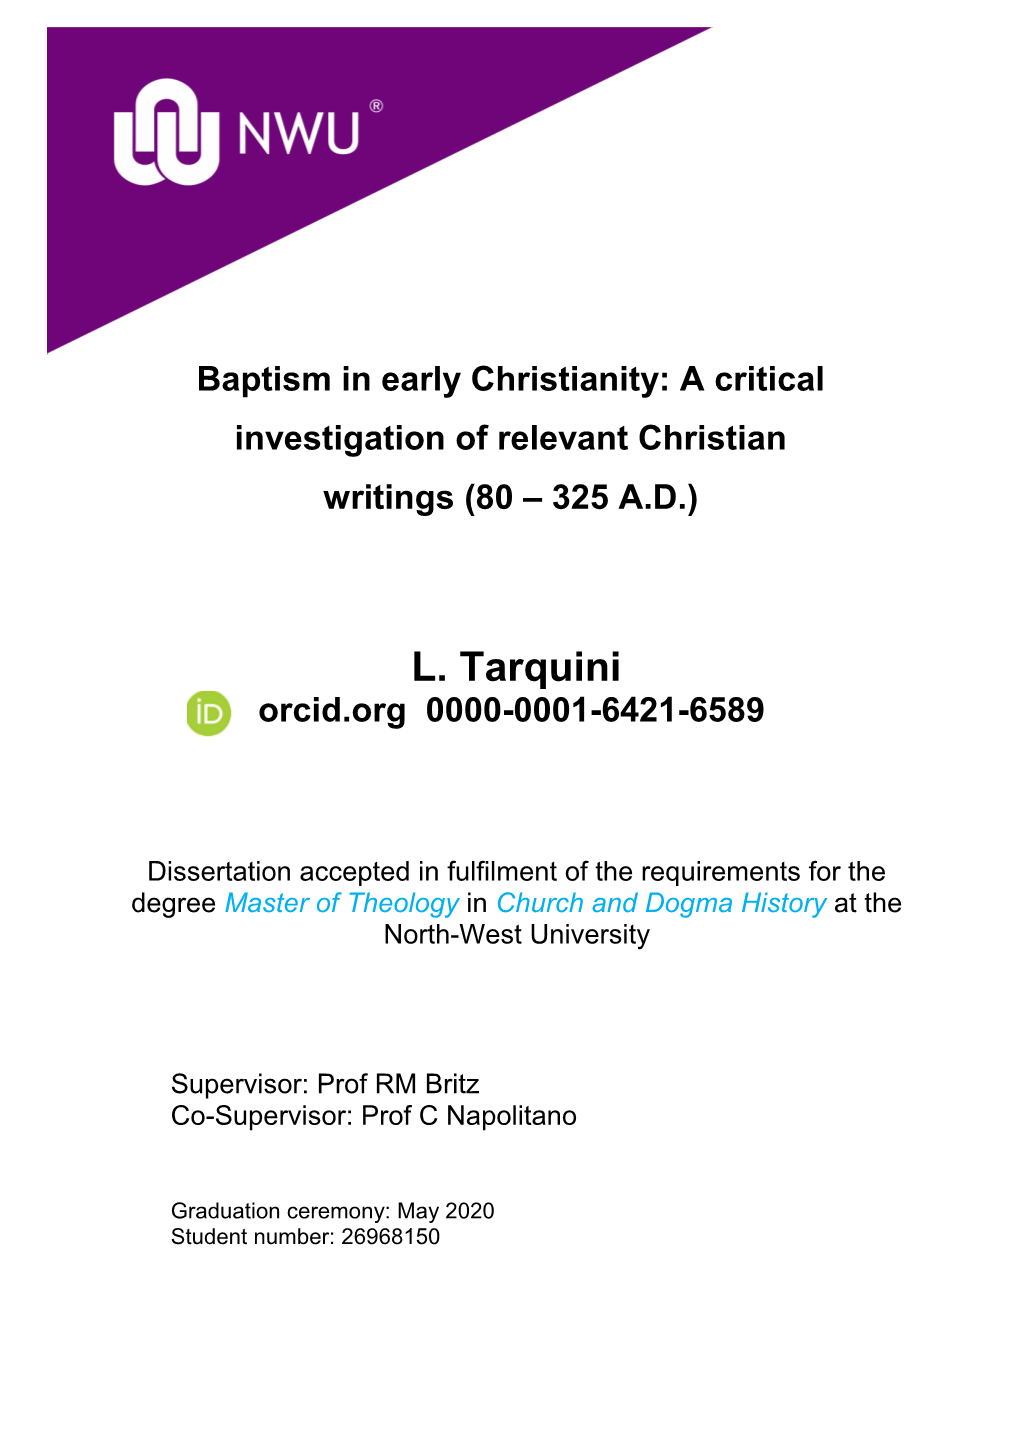 A Critical Investigation of Relevant Christian Writings (80 – 325 A.D.)